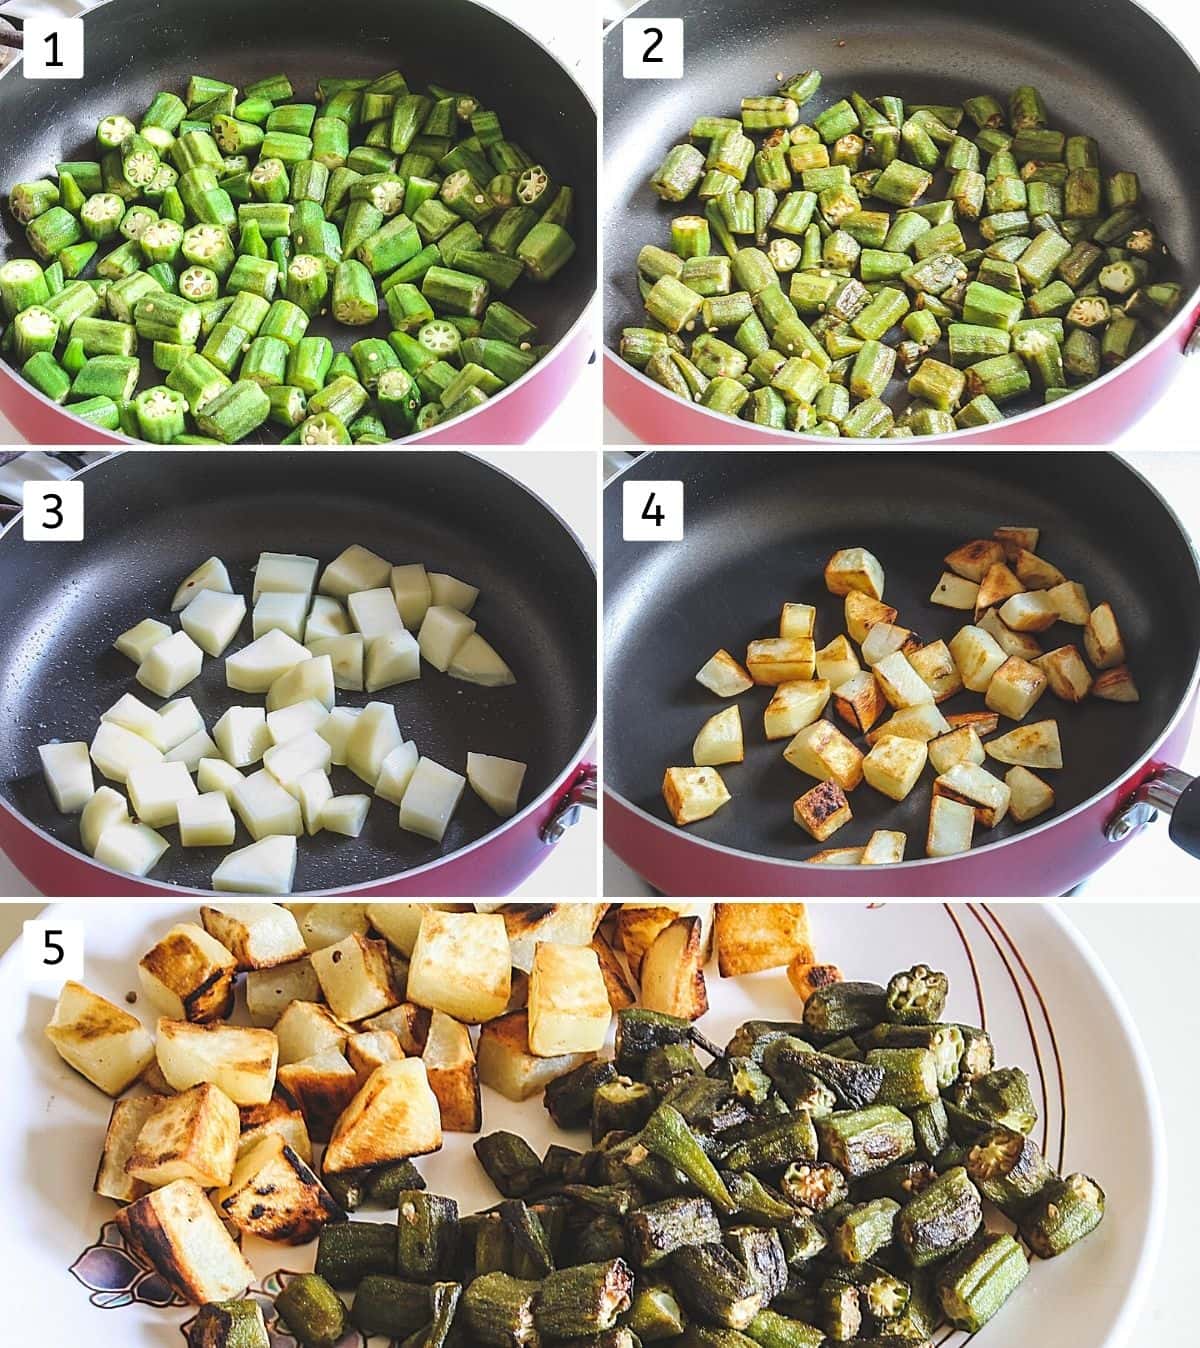 Collage of 5 steps showing okra in the pan, cooked okra, potato cubes in pan, cooked potatoes, both removed to plate.